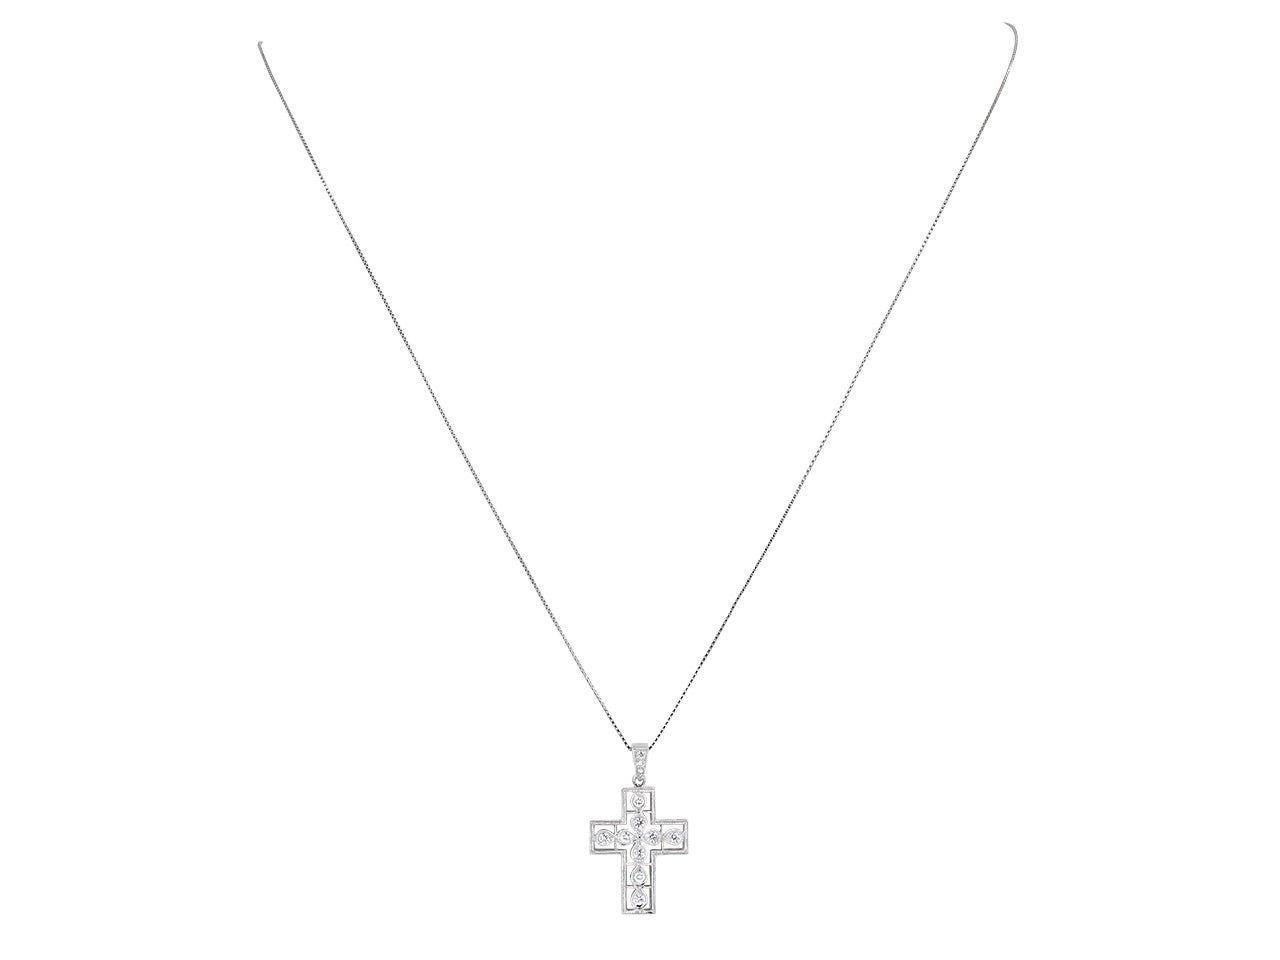 Cartier 18k White Gold and Diamond Cross Pendant Necklace with Paper 1 –  Joseph Robert Jewelers